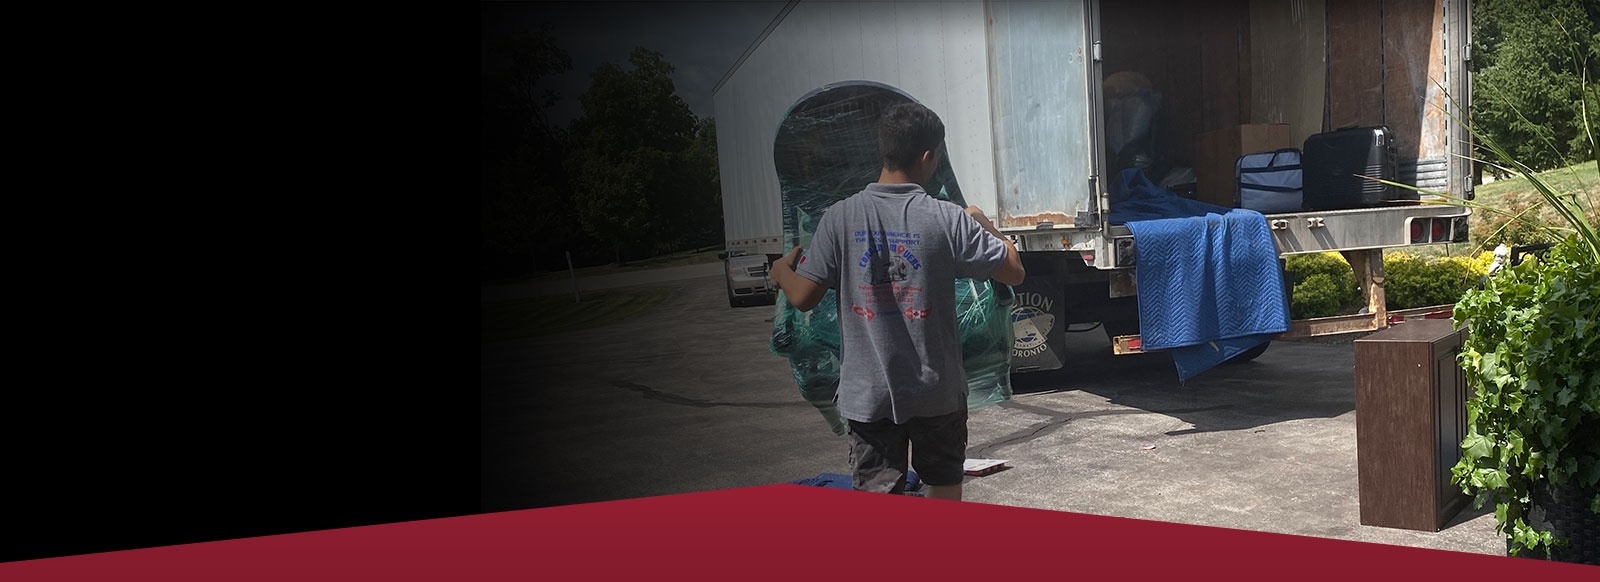 Coraza Movers offer Labour Only Moving Services across Toronto, Ontario